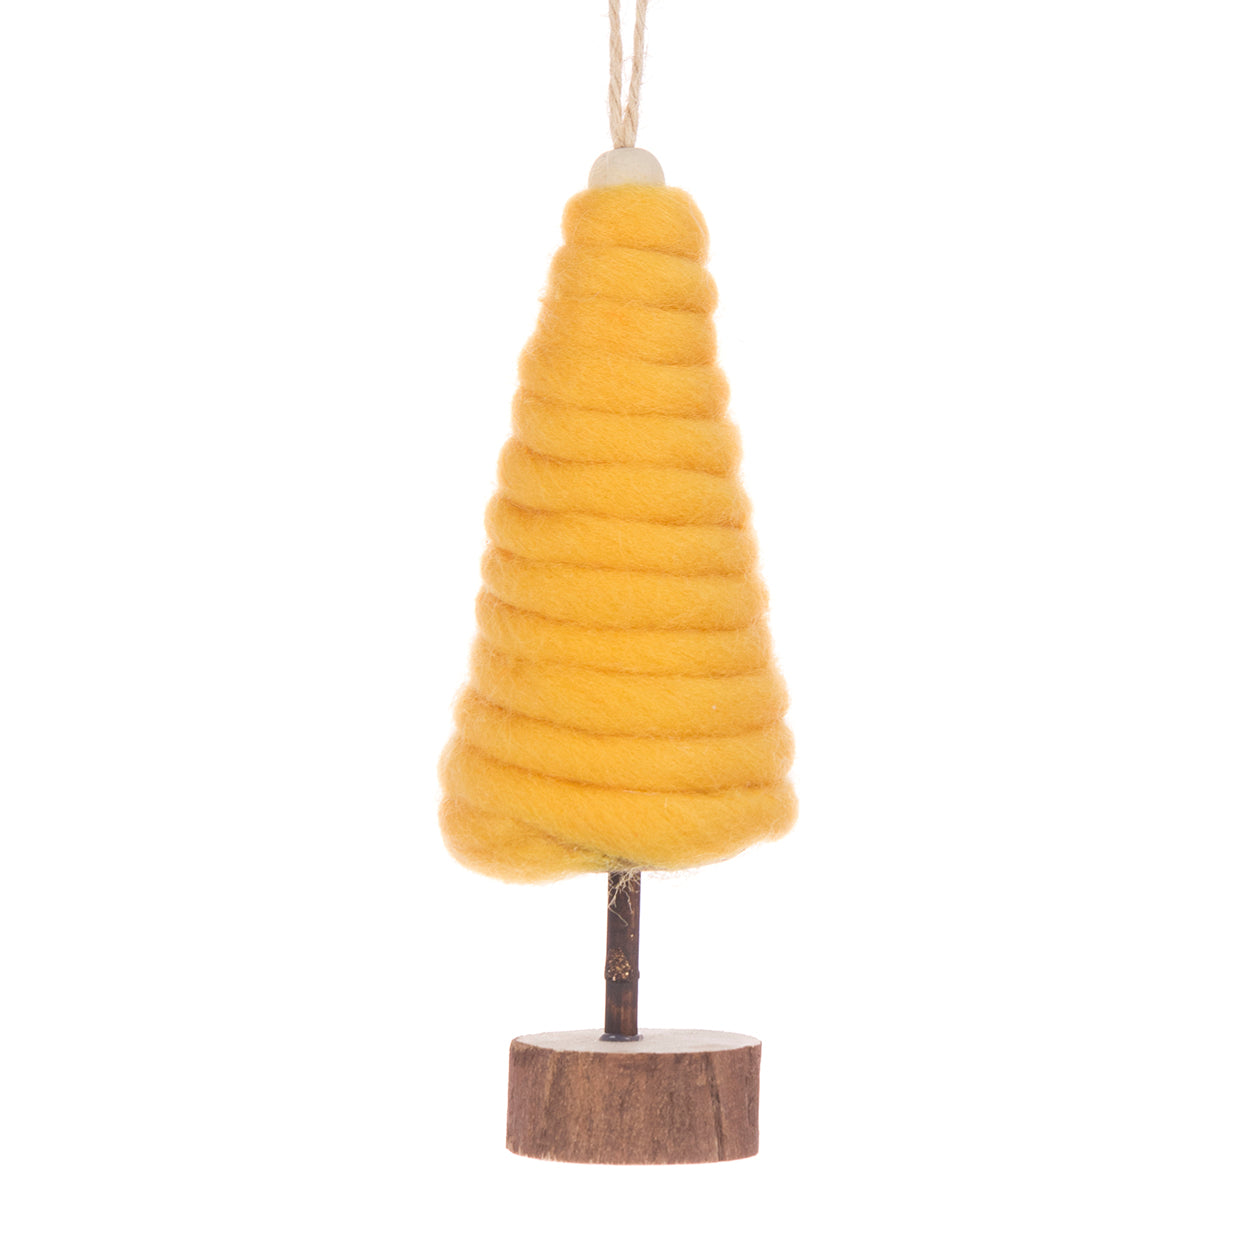 Charming yellow woolen Christmas tree decoration on a wooden base.